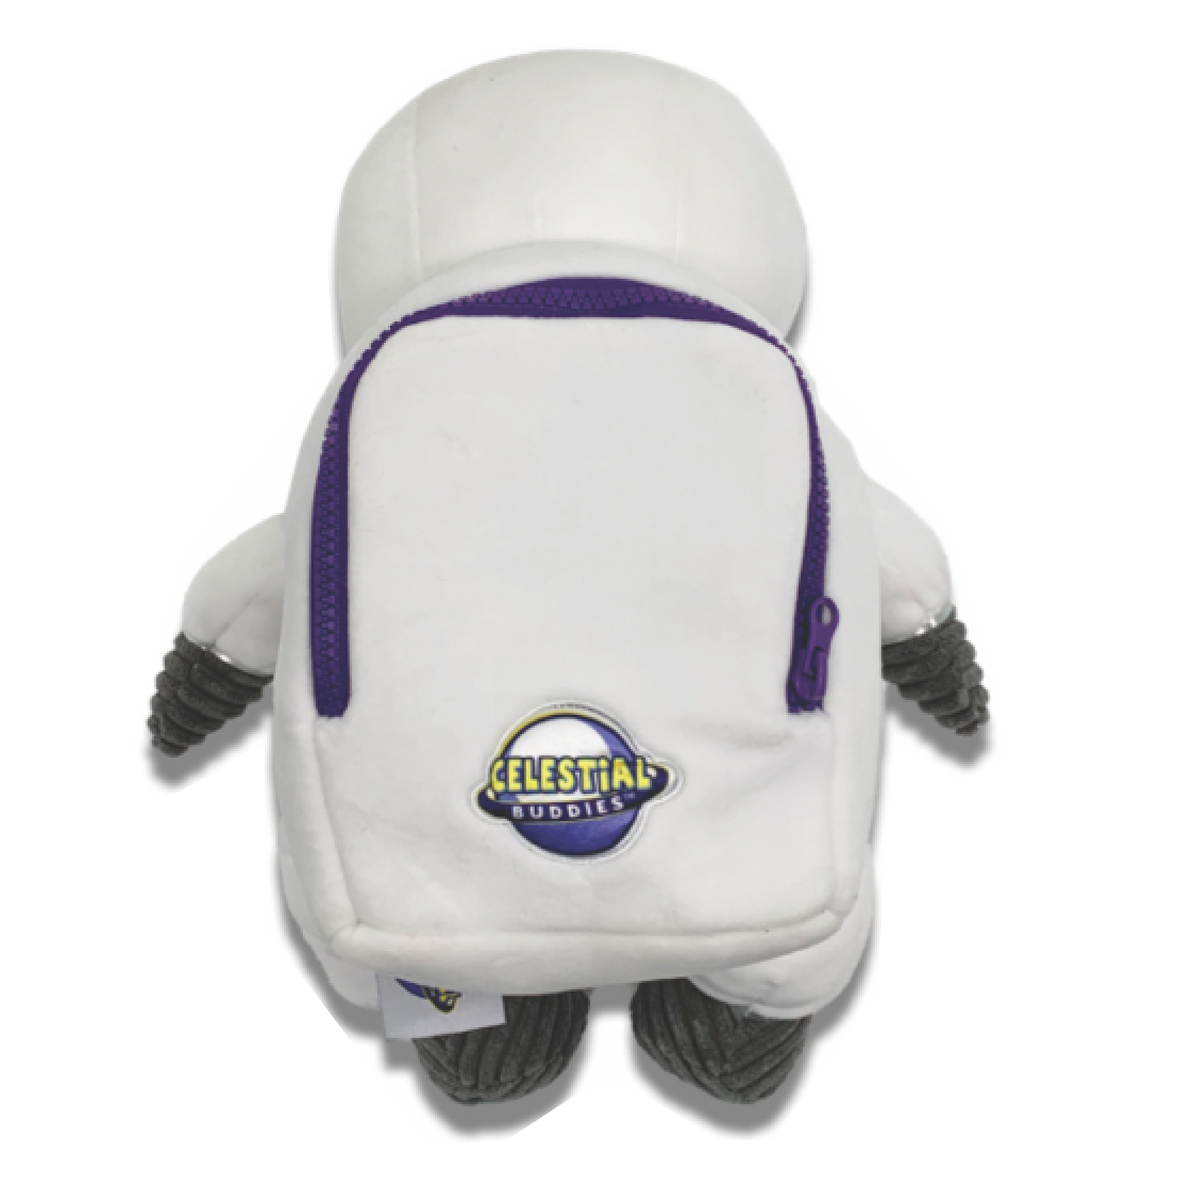 Rear view of the AstroBuddy showing his backpack.